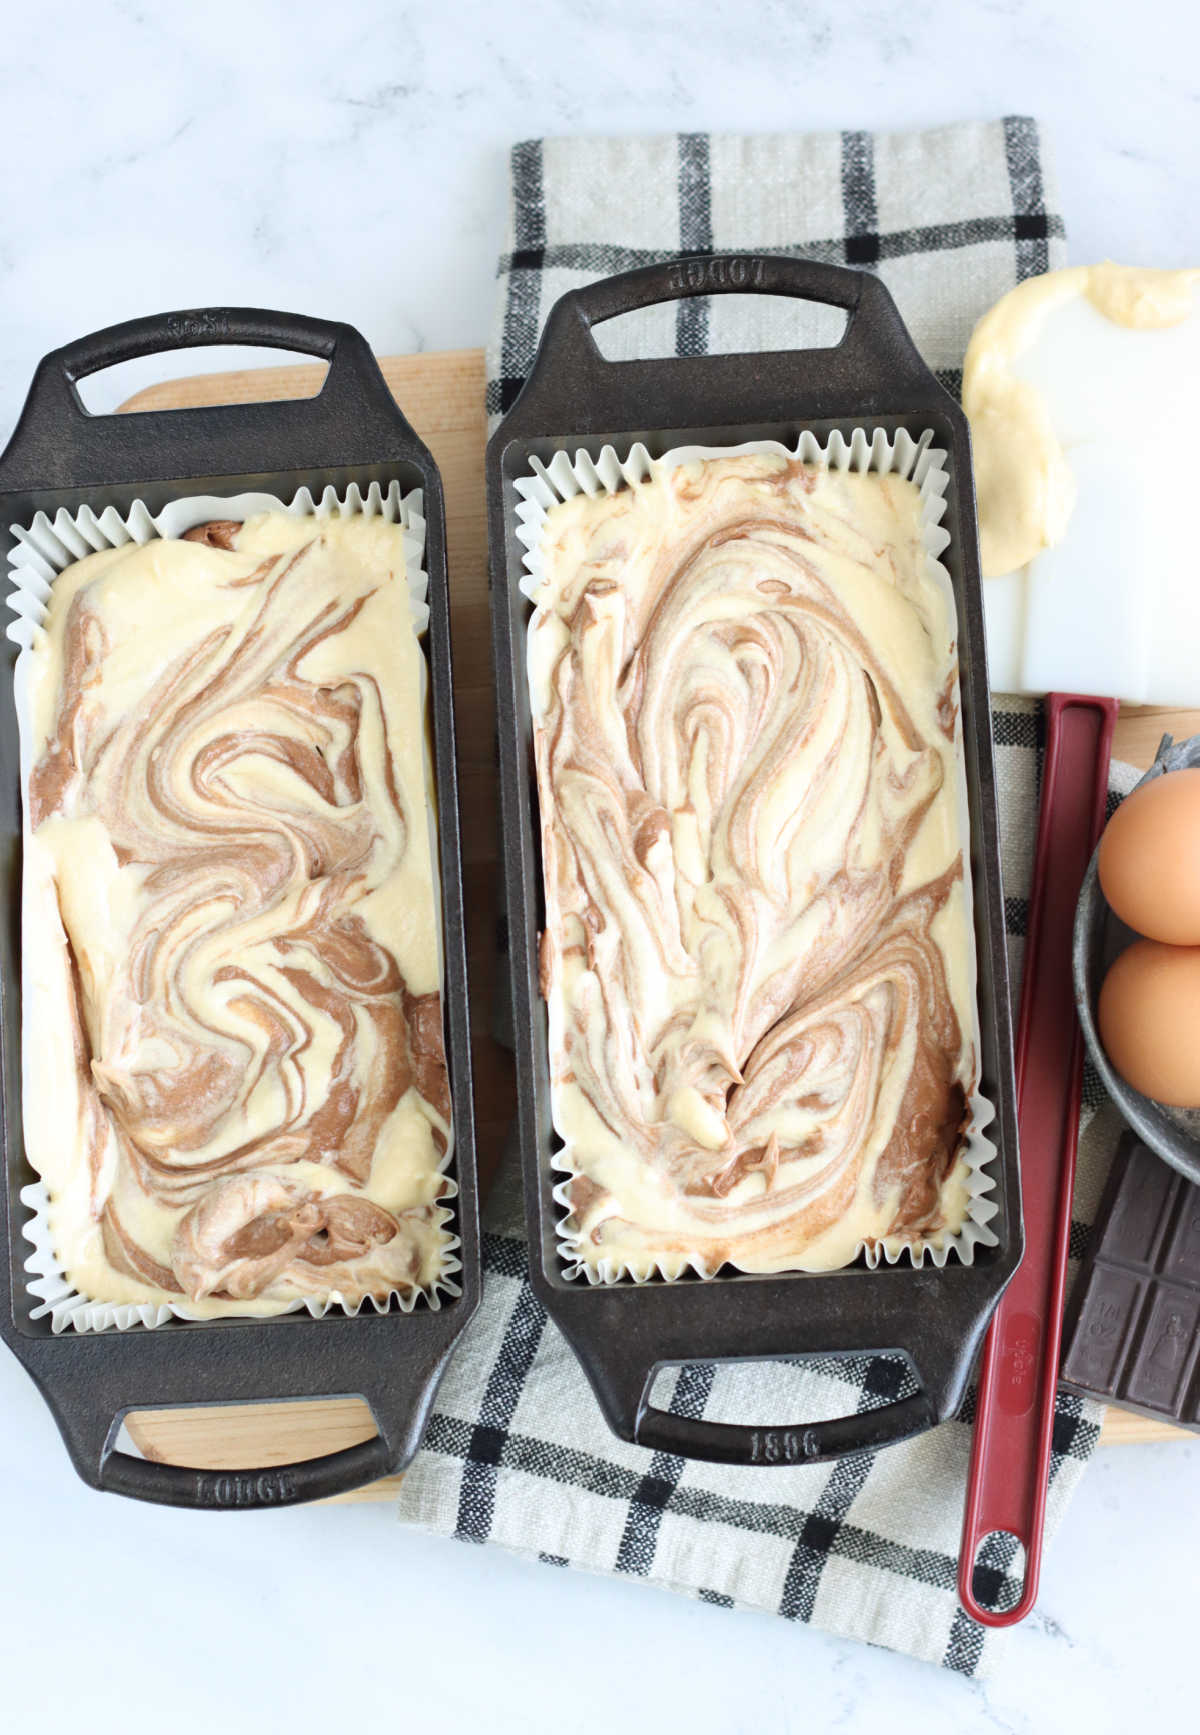 Chocolate and vanilla cake batter swirled in two cast iron loaf pans on wooden cutting board.